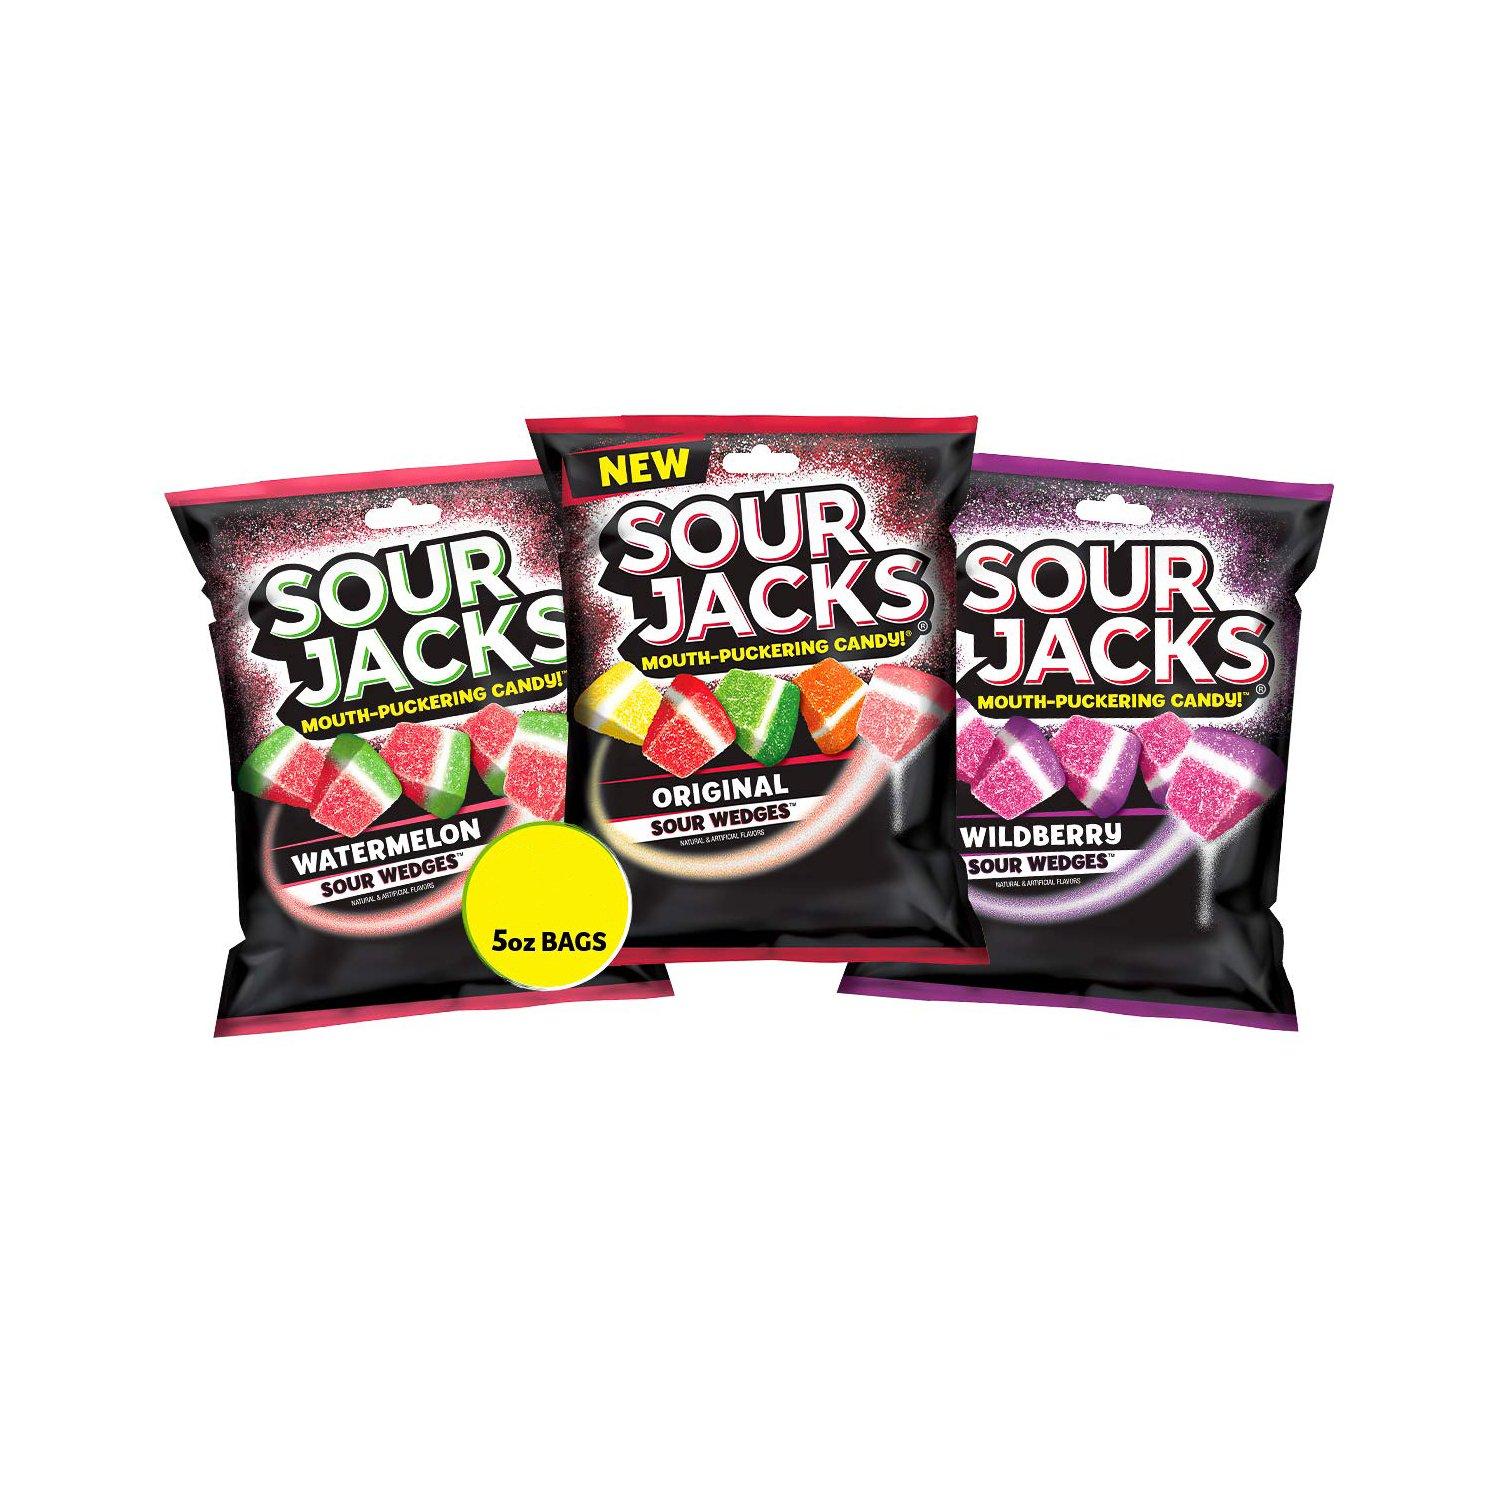 Sour Jack Mouth-Pluckering Candy Sour Jack 